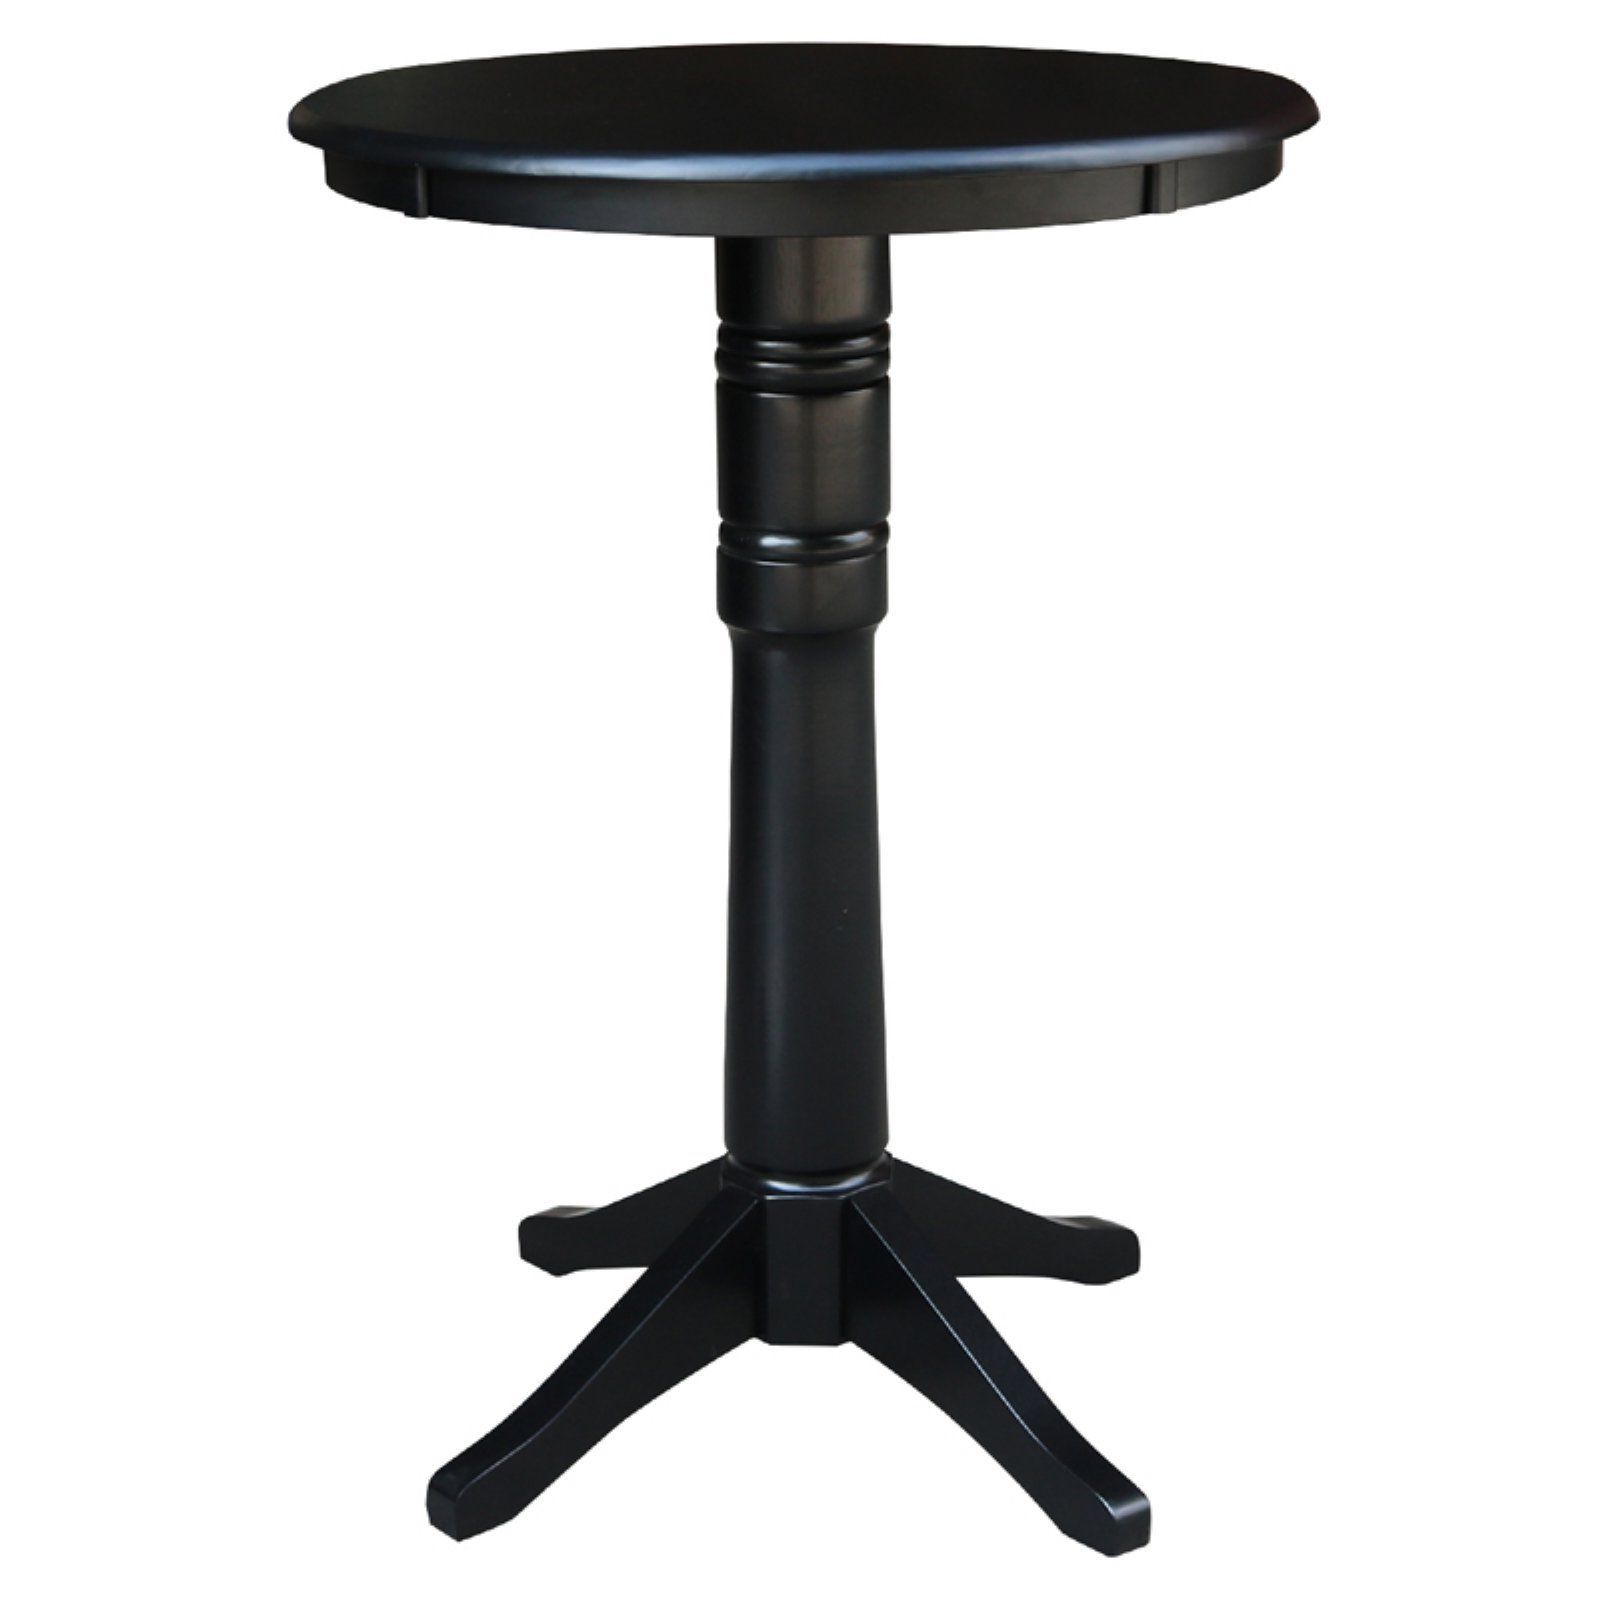 Widely Used International Concepts Straight Pedestal Bar Height Table With Andreniki Bar Height Pedestal Dining Tables (Gallery 19 of 20)